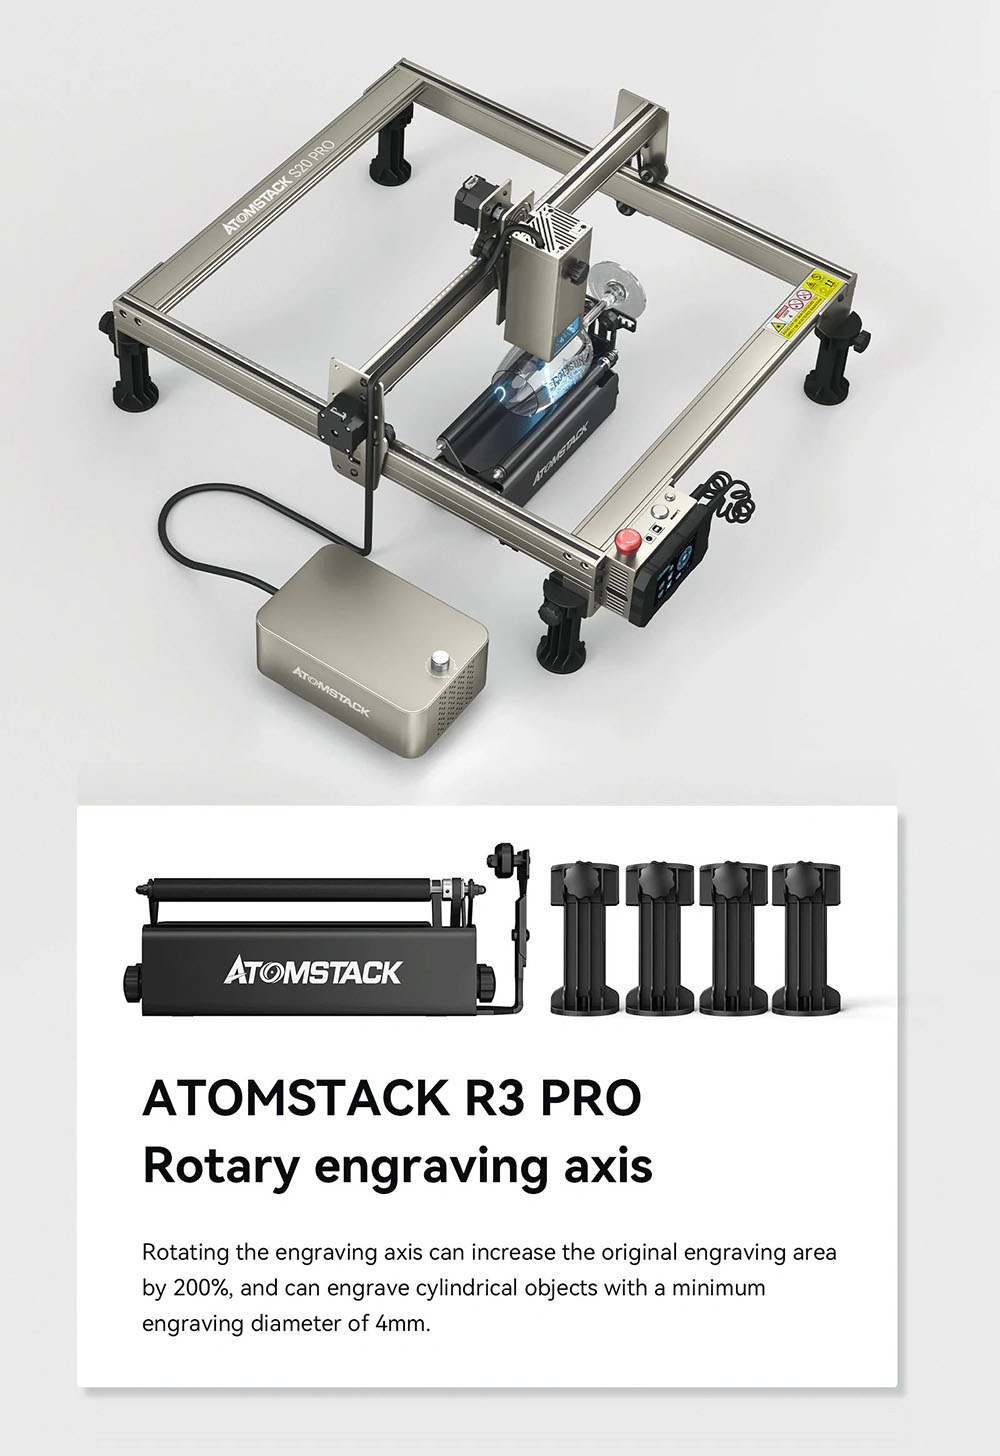 ATOMSTACK S20 Pro 20W Laser Engraver Cutter with Air Assist Kits, Focus Free, Quad-core Diode Laser, Offline Engraving - US